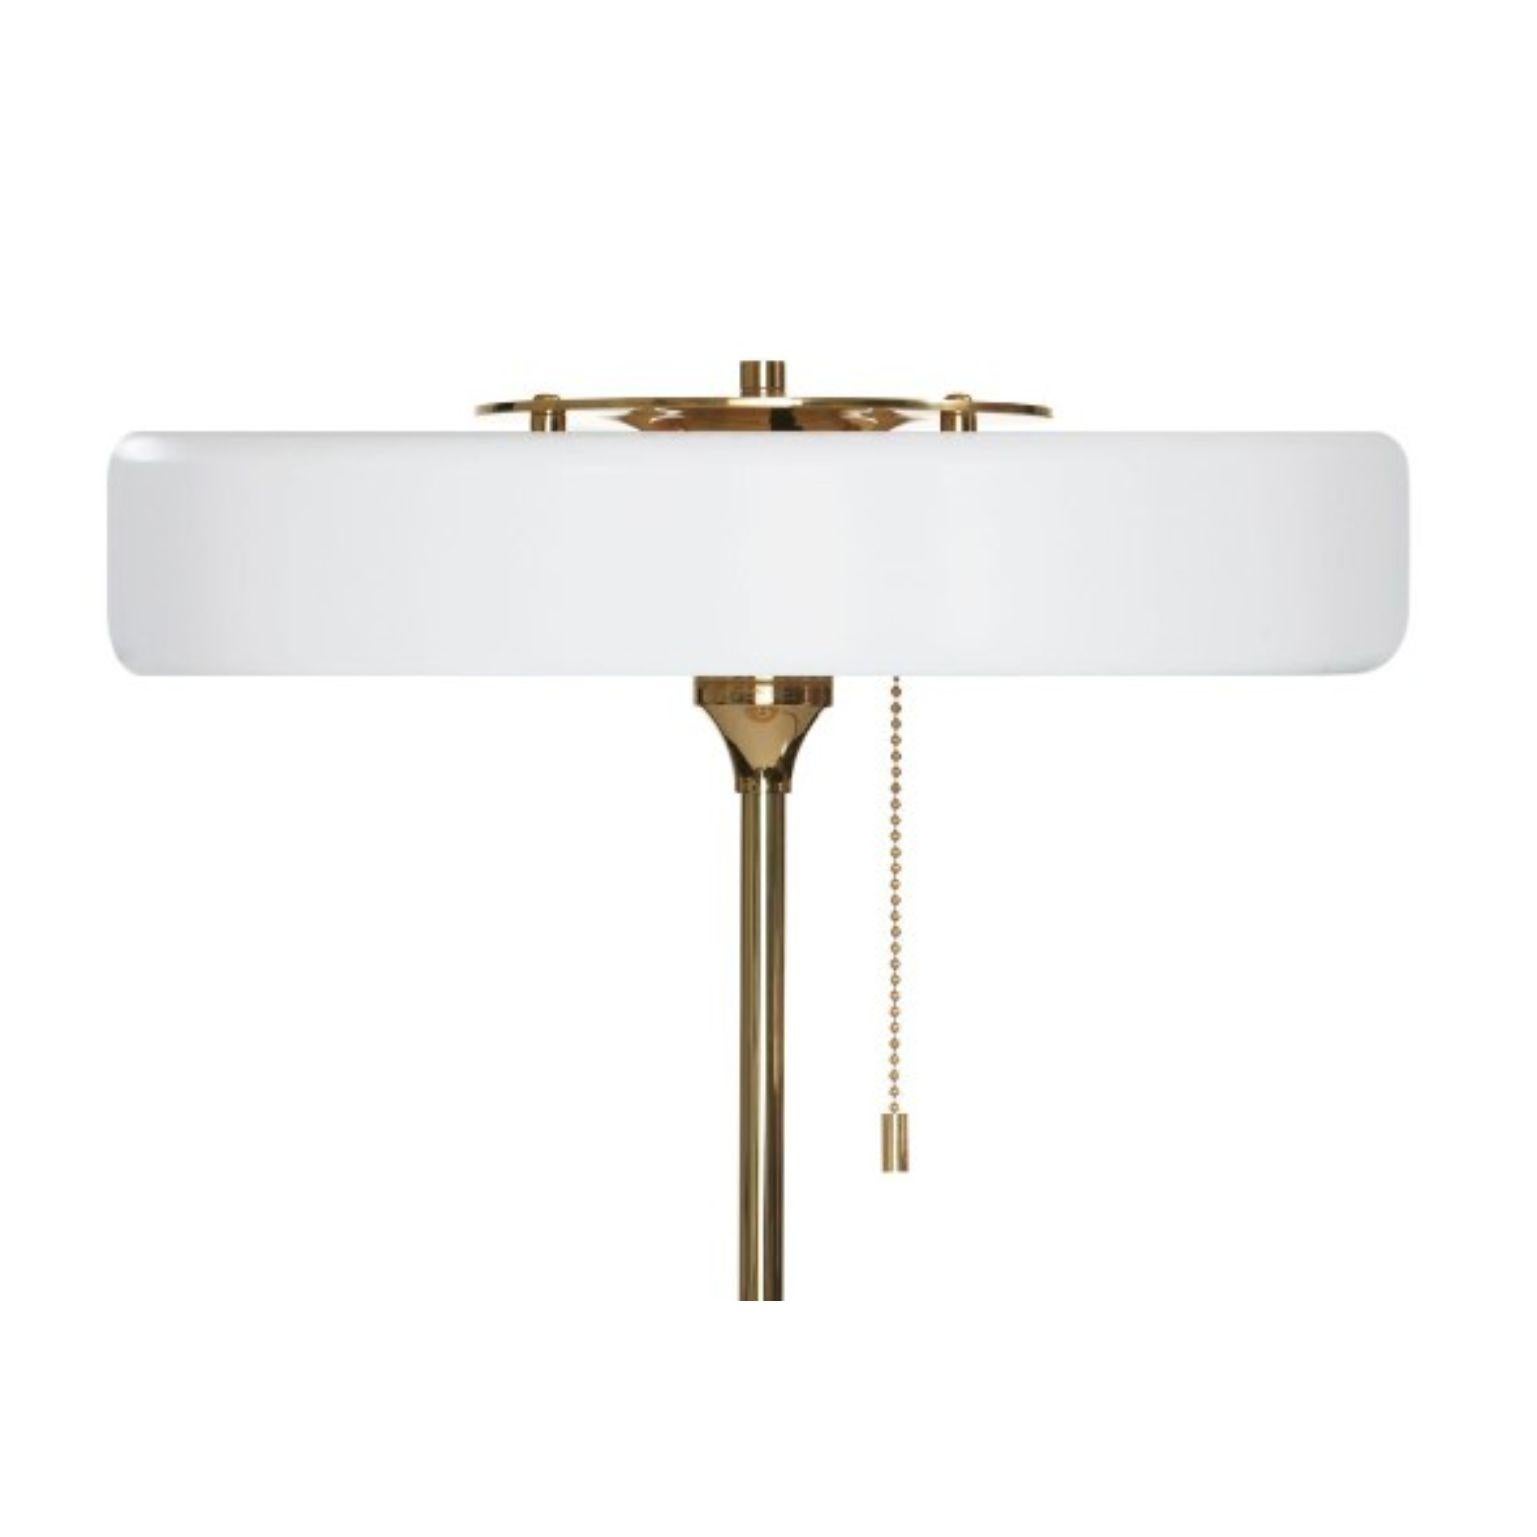 Modern Revolve Table Lamp, Polished Brass, White by Bert Frank For Sale